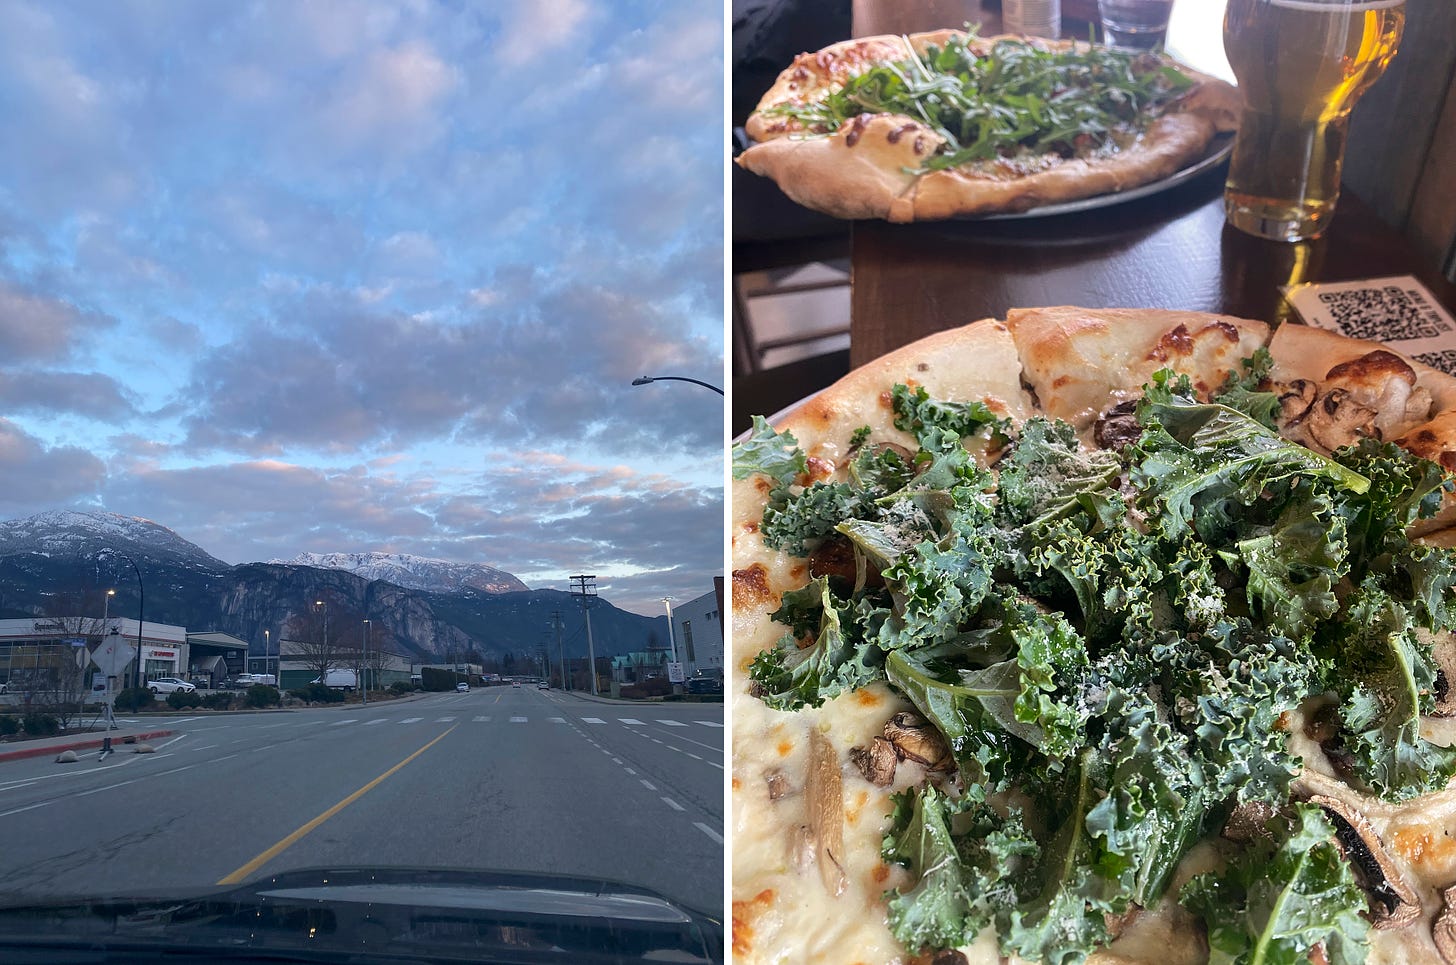 Left image: taken from the dashboard of our car, a view of a street in Squamish at sunset, snow-capped mountains and pinkish-blue clouds in the background. Bits of sky are visible between the clouds. Right image: two pizzas sitting on top of a wooden bar; the one in the foreground is mushroom topped with kale leaves dusted with parmesan, and in the background is fig and prosciutto with arugula.